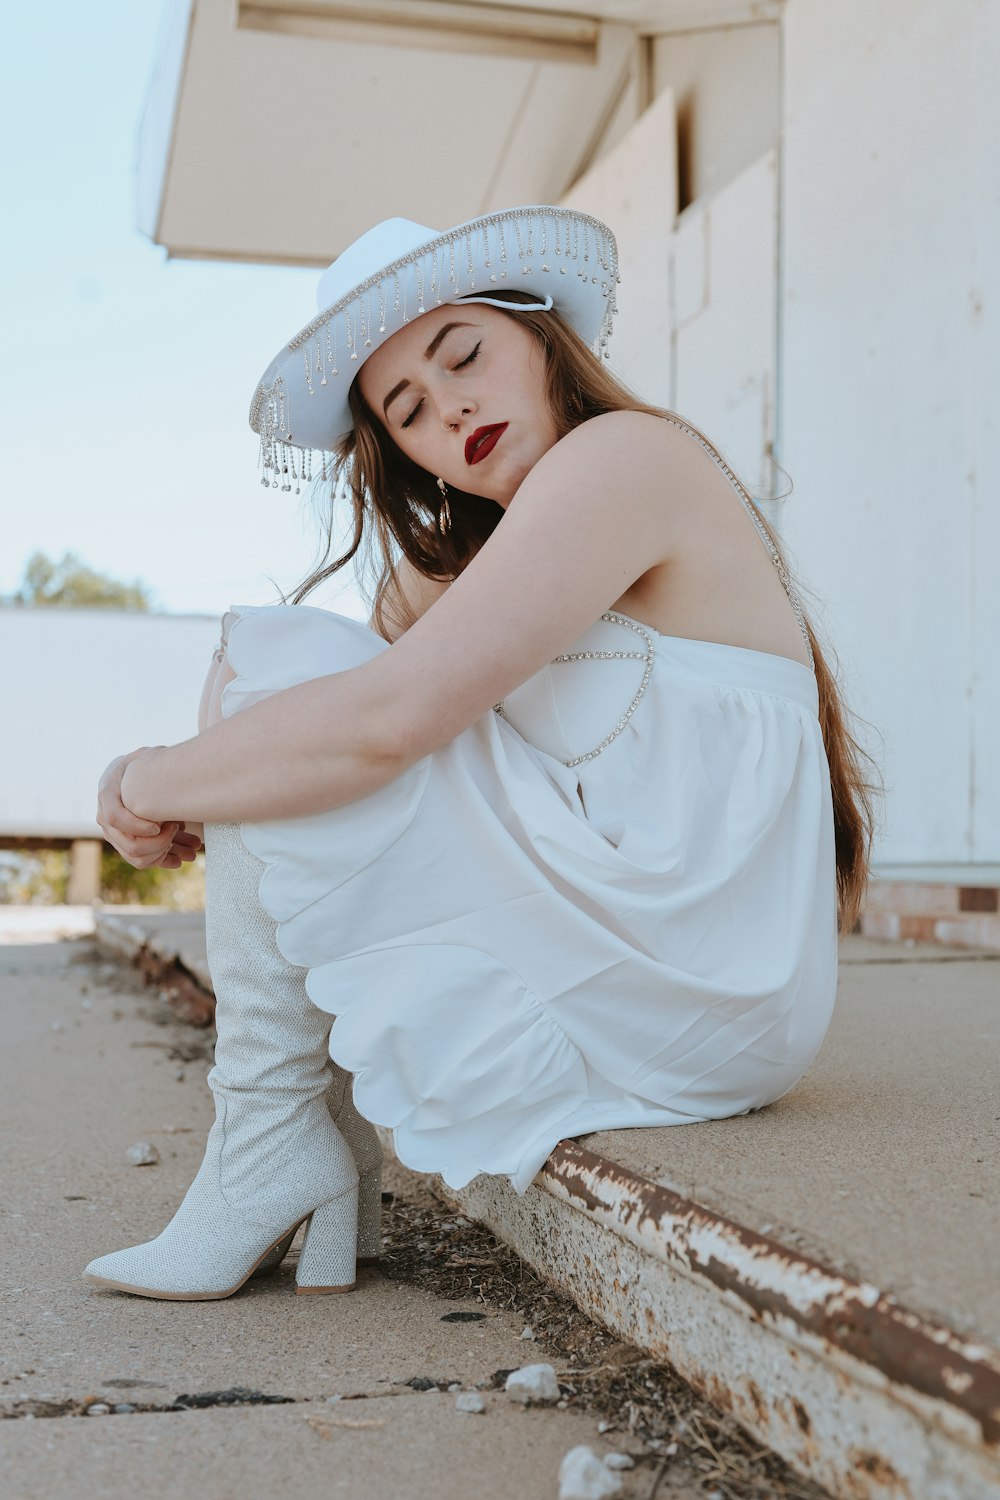 a woman in a white dress and hat sitting on the ground